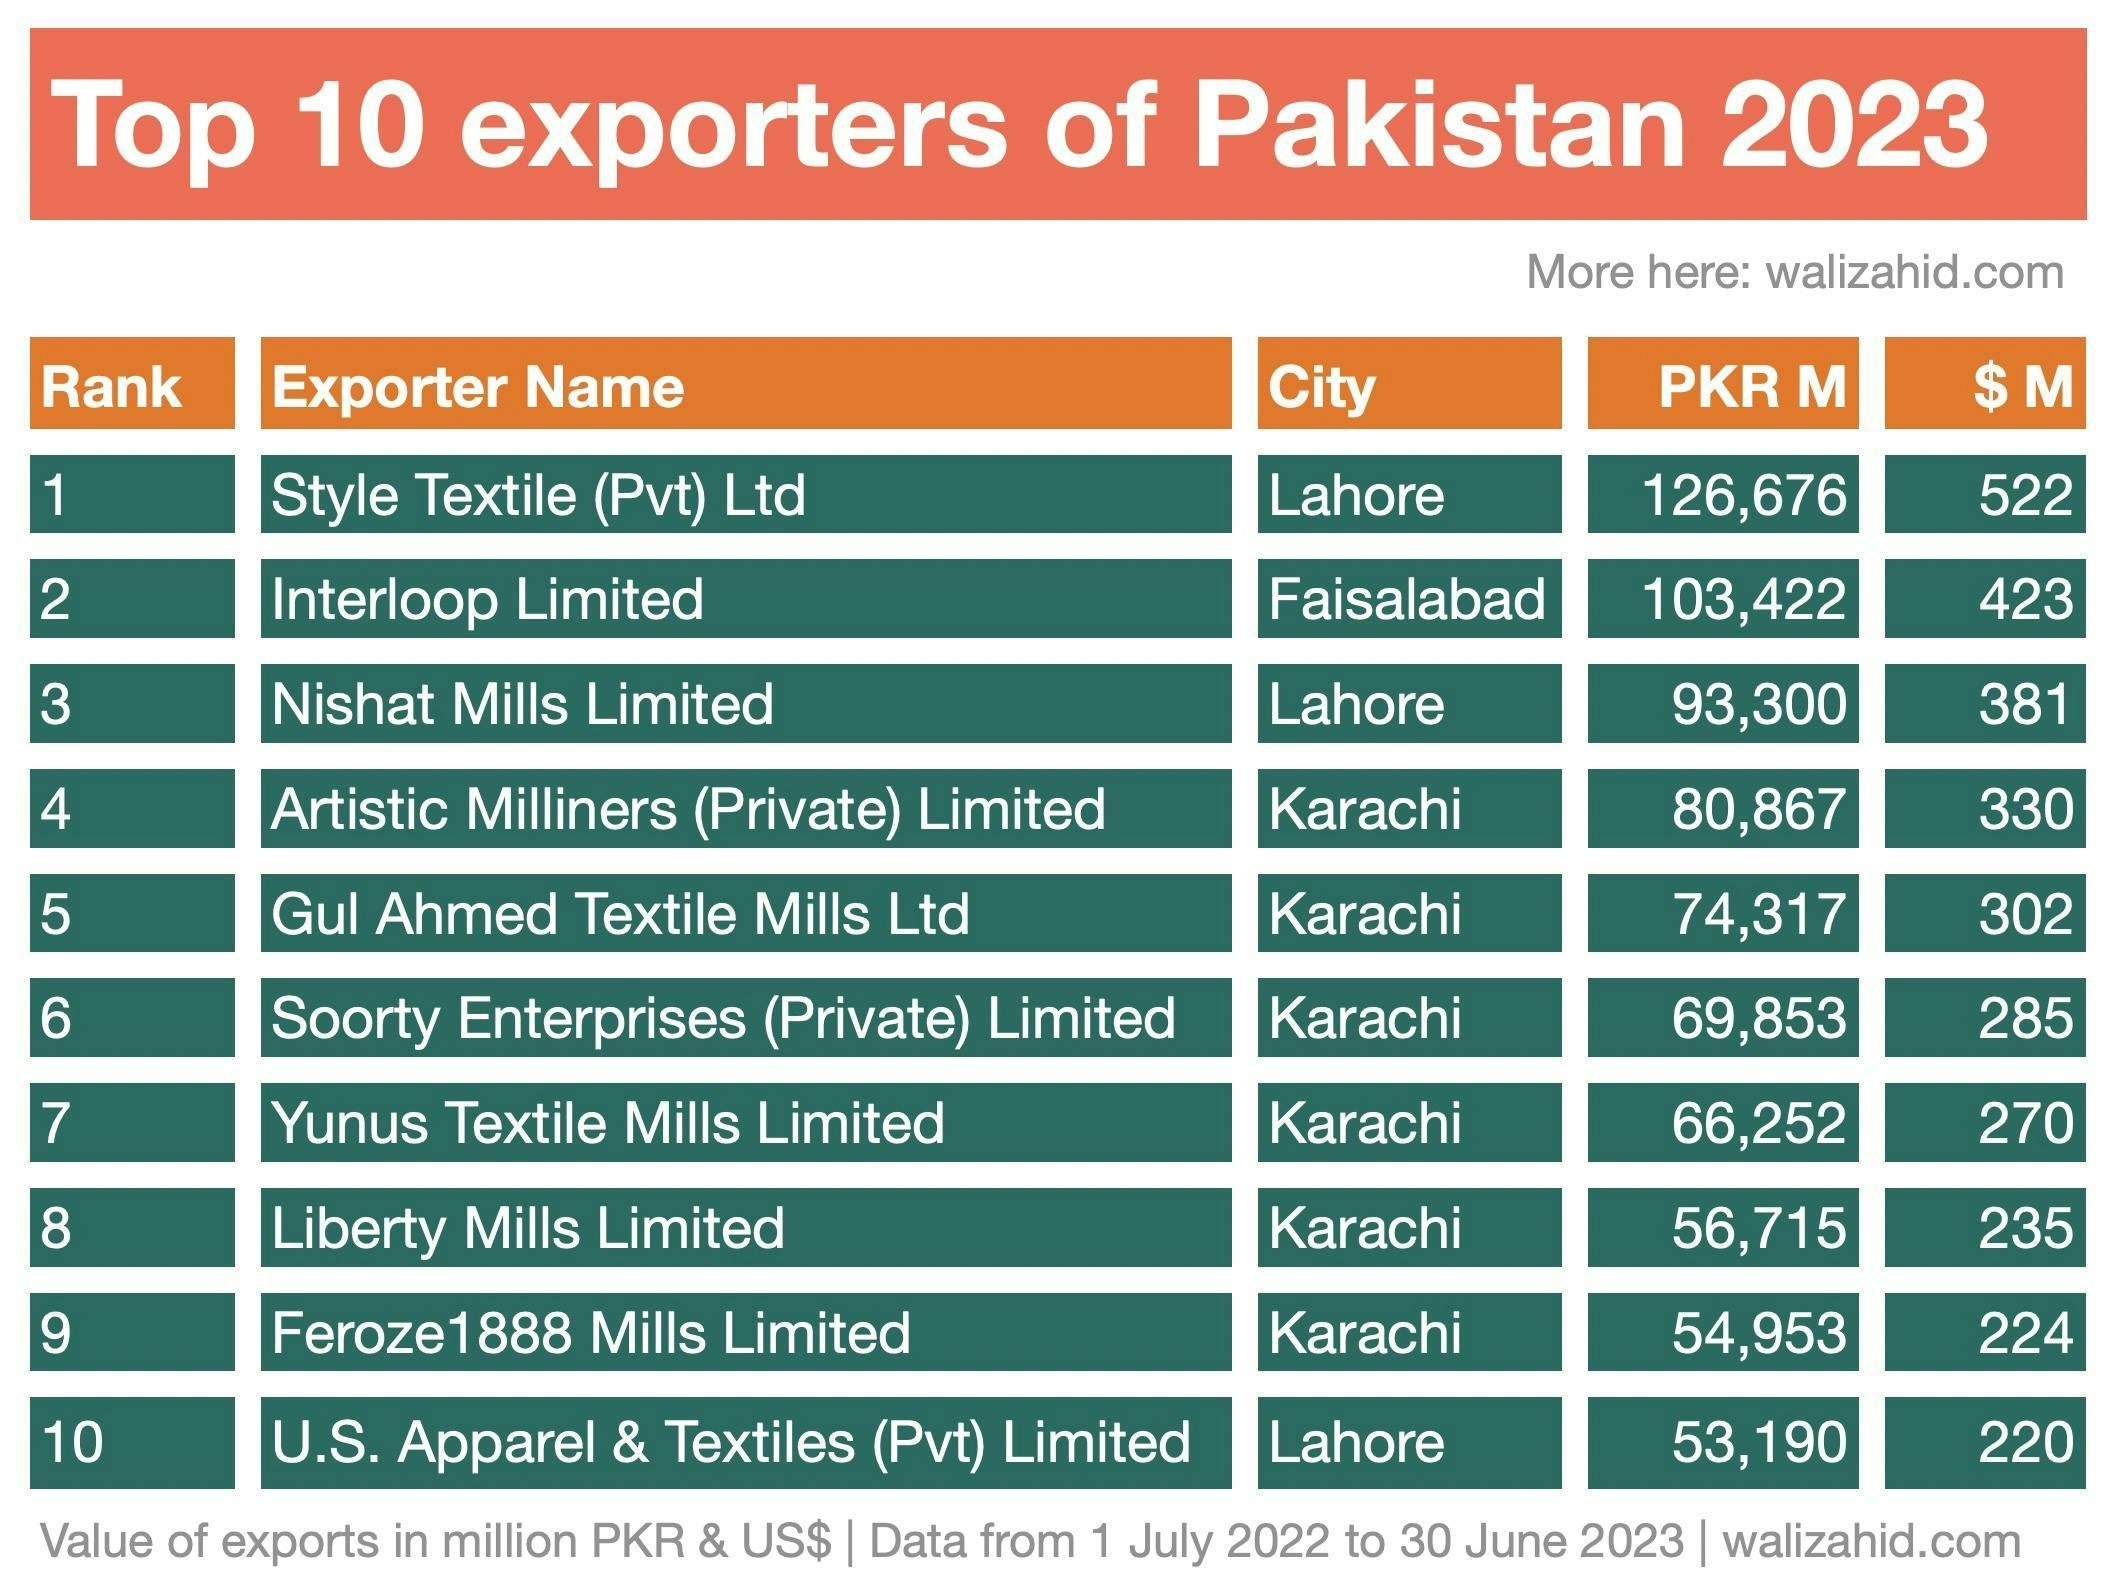 Who are the top 10 exporters of Pakistan in 2023? Check this out.